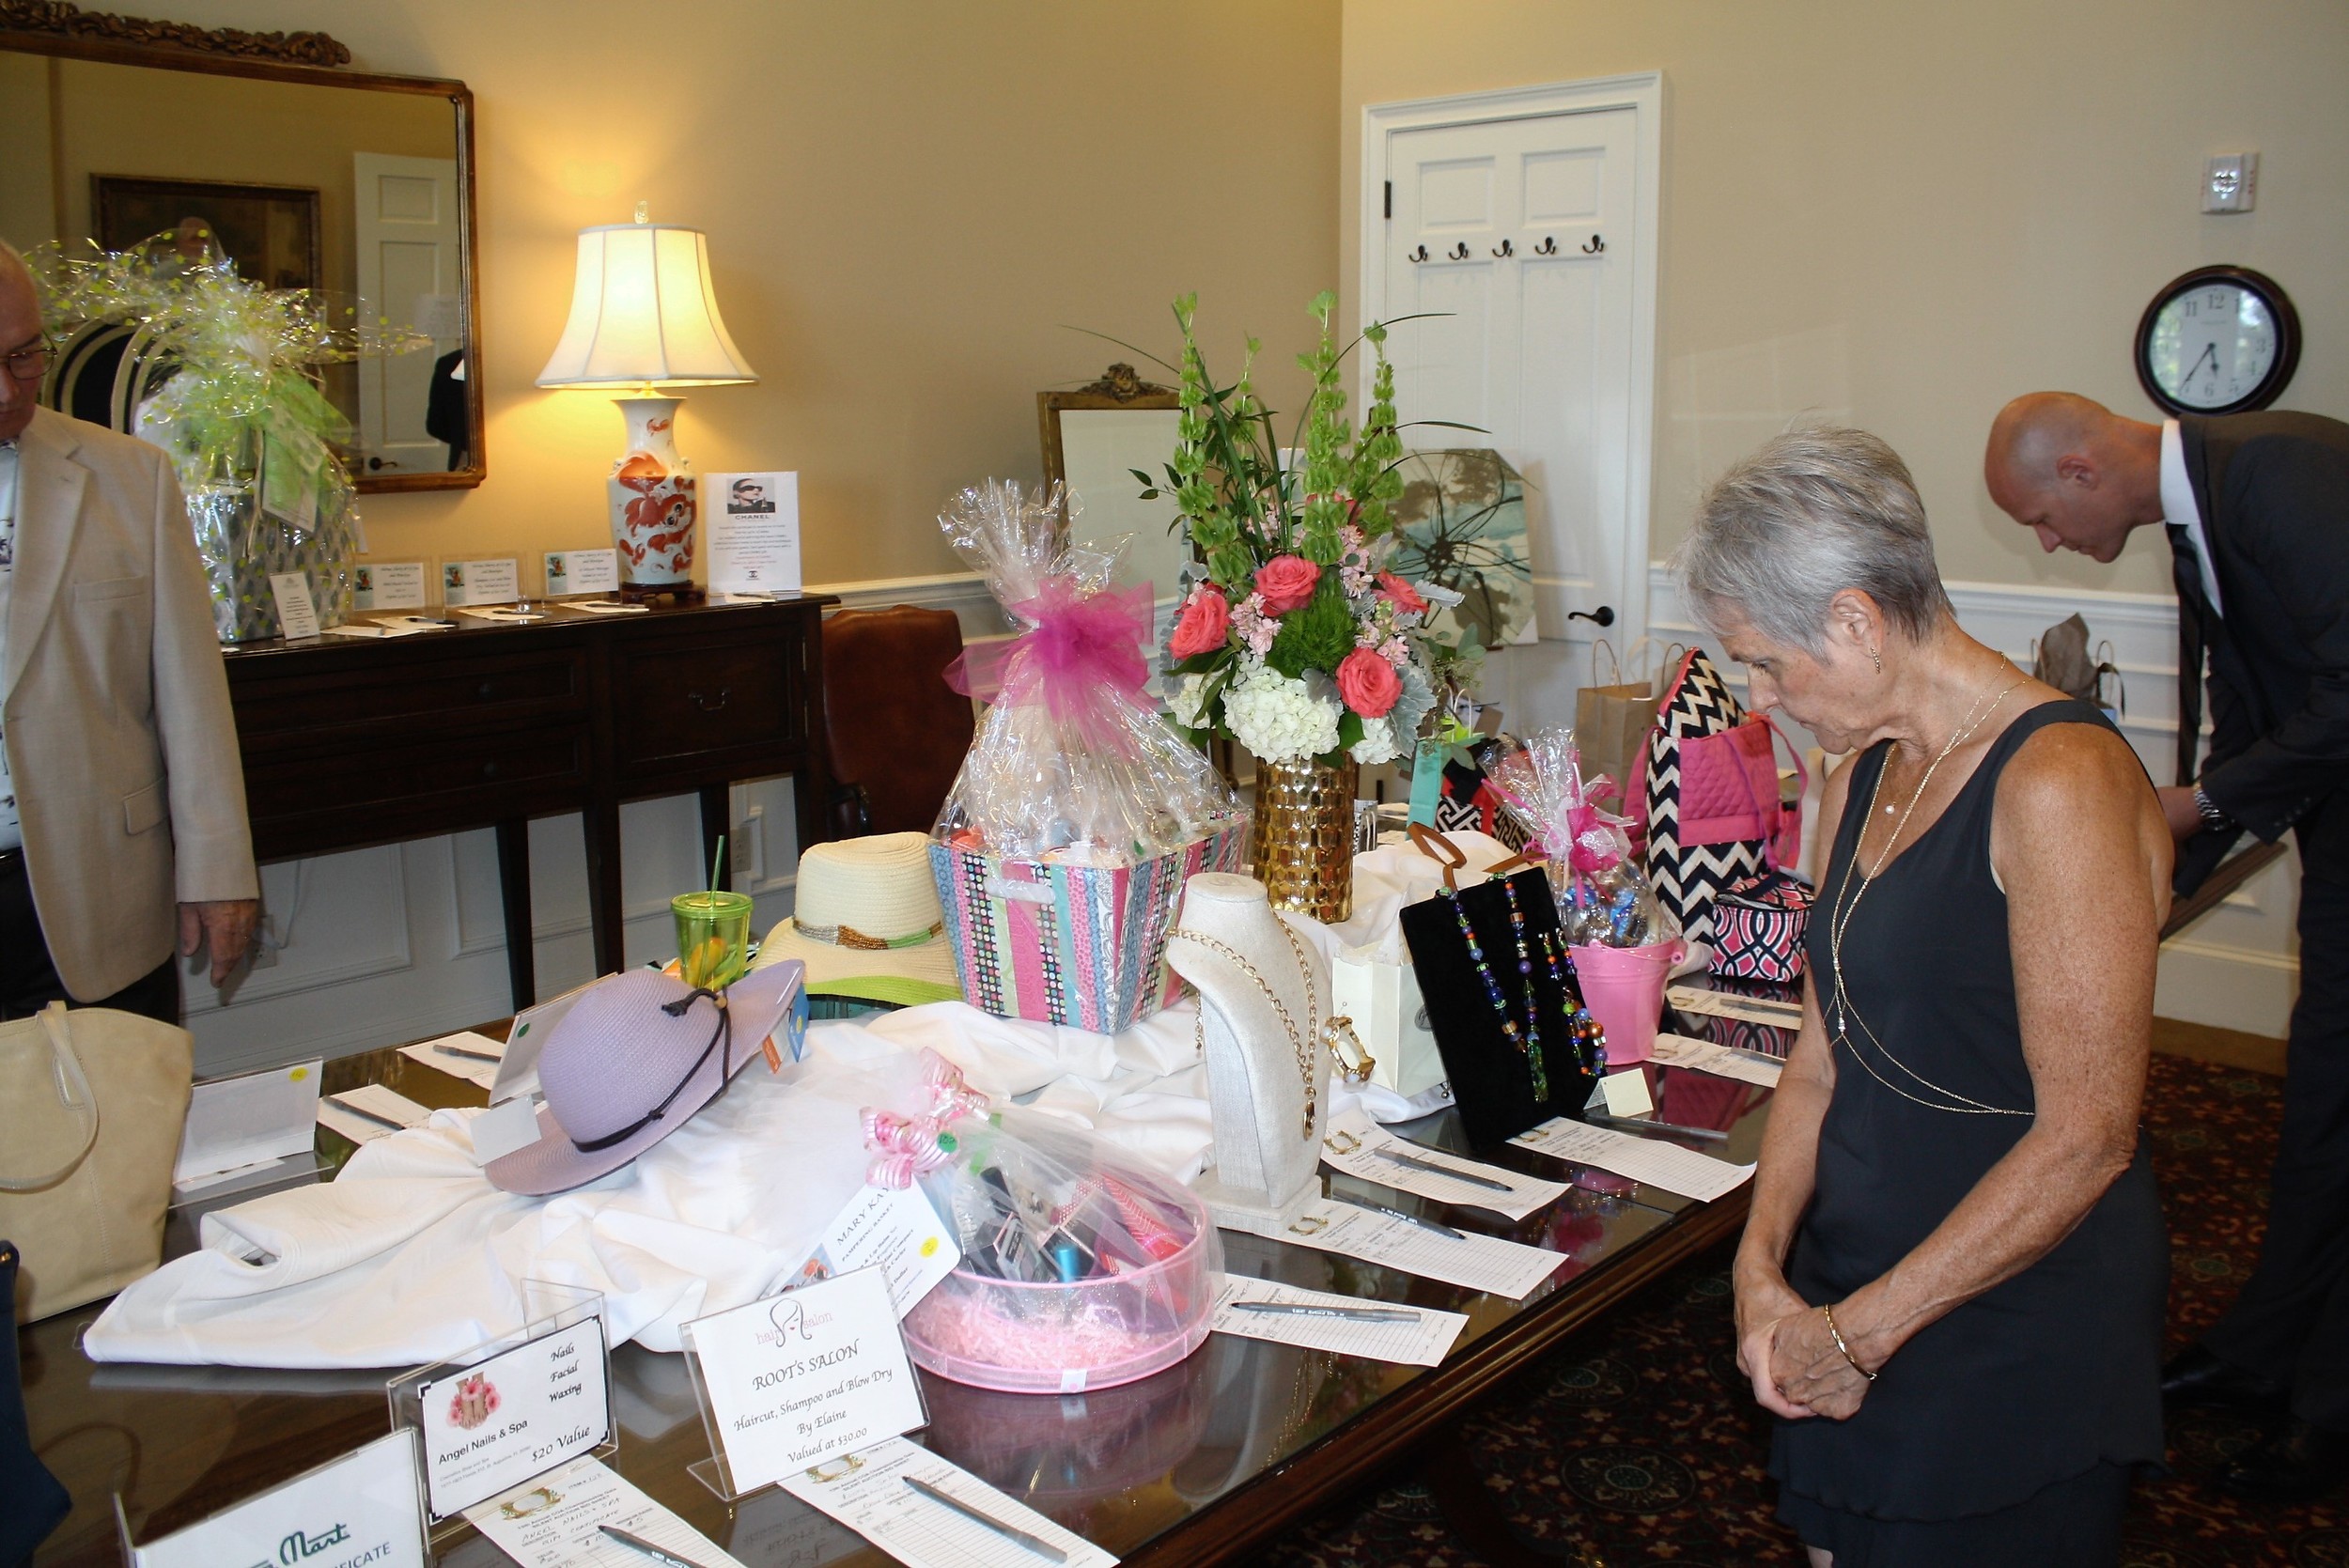 Guests peruse the silent auction offerings